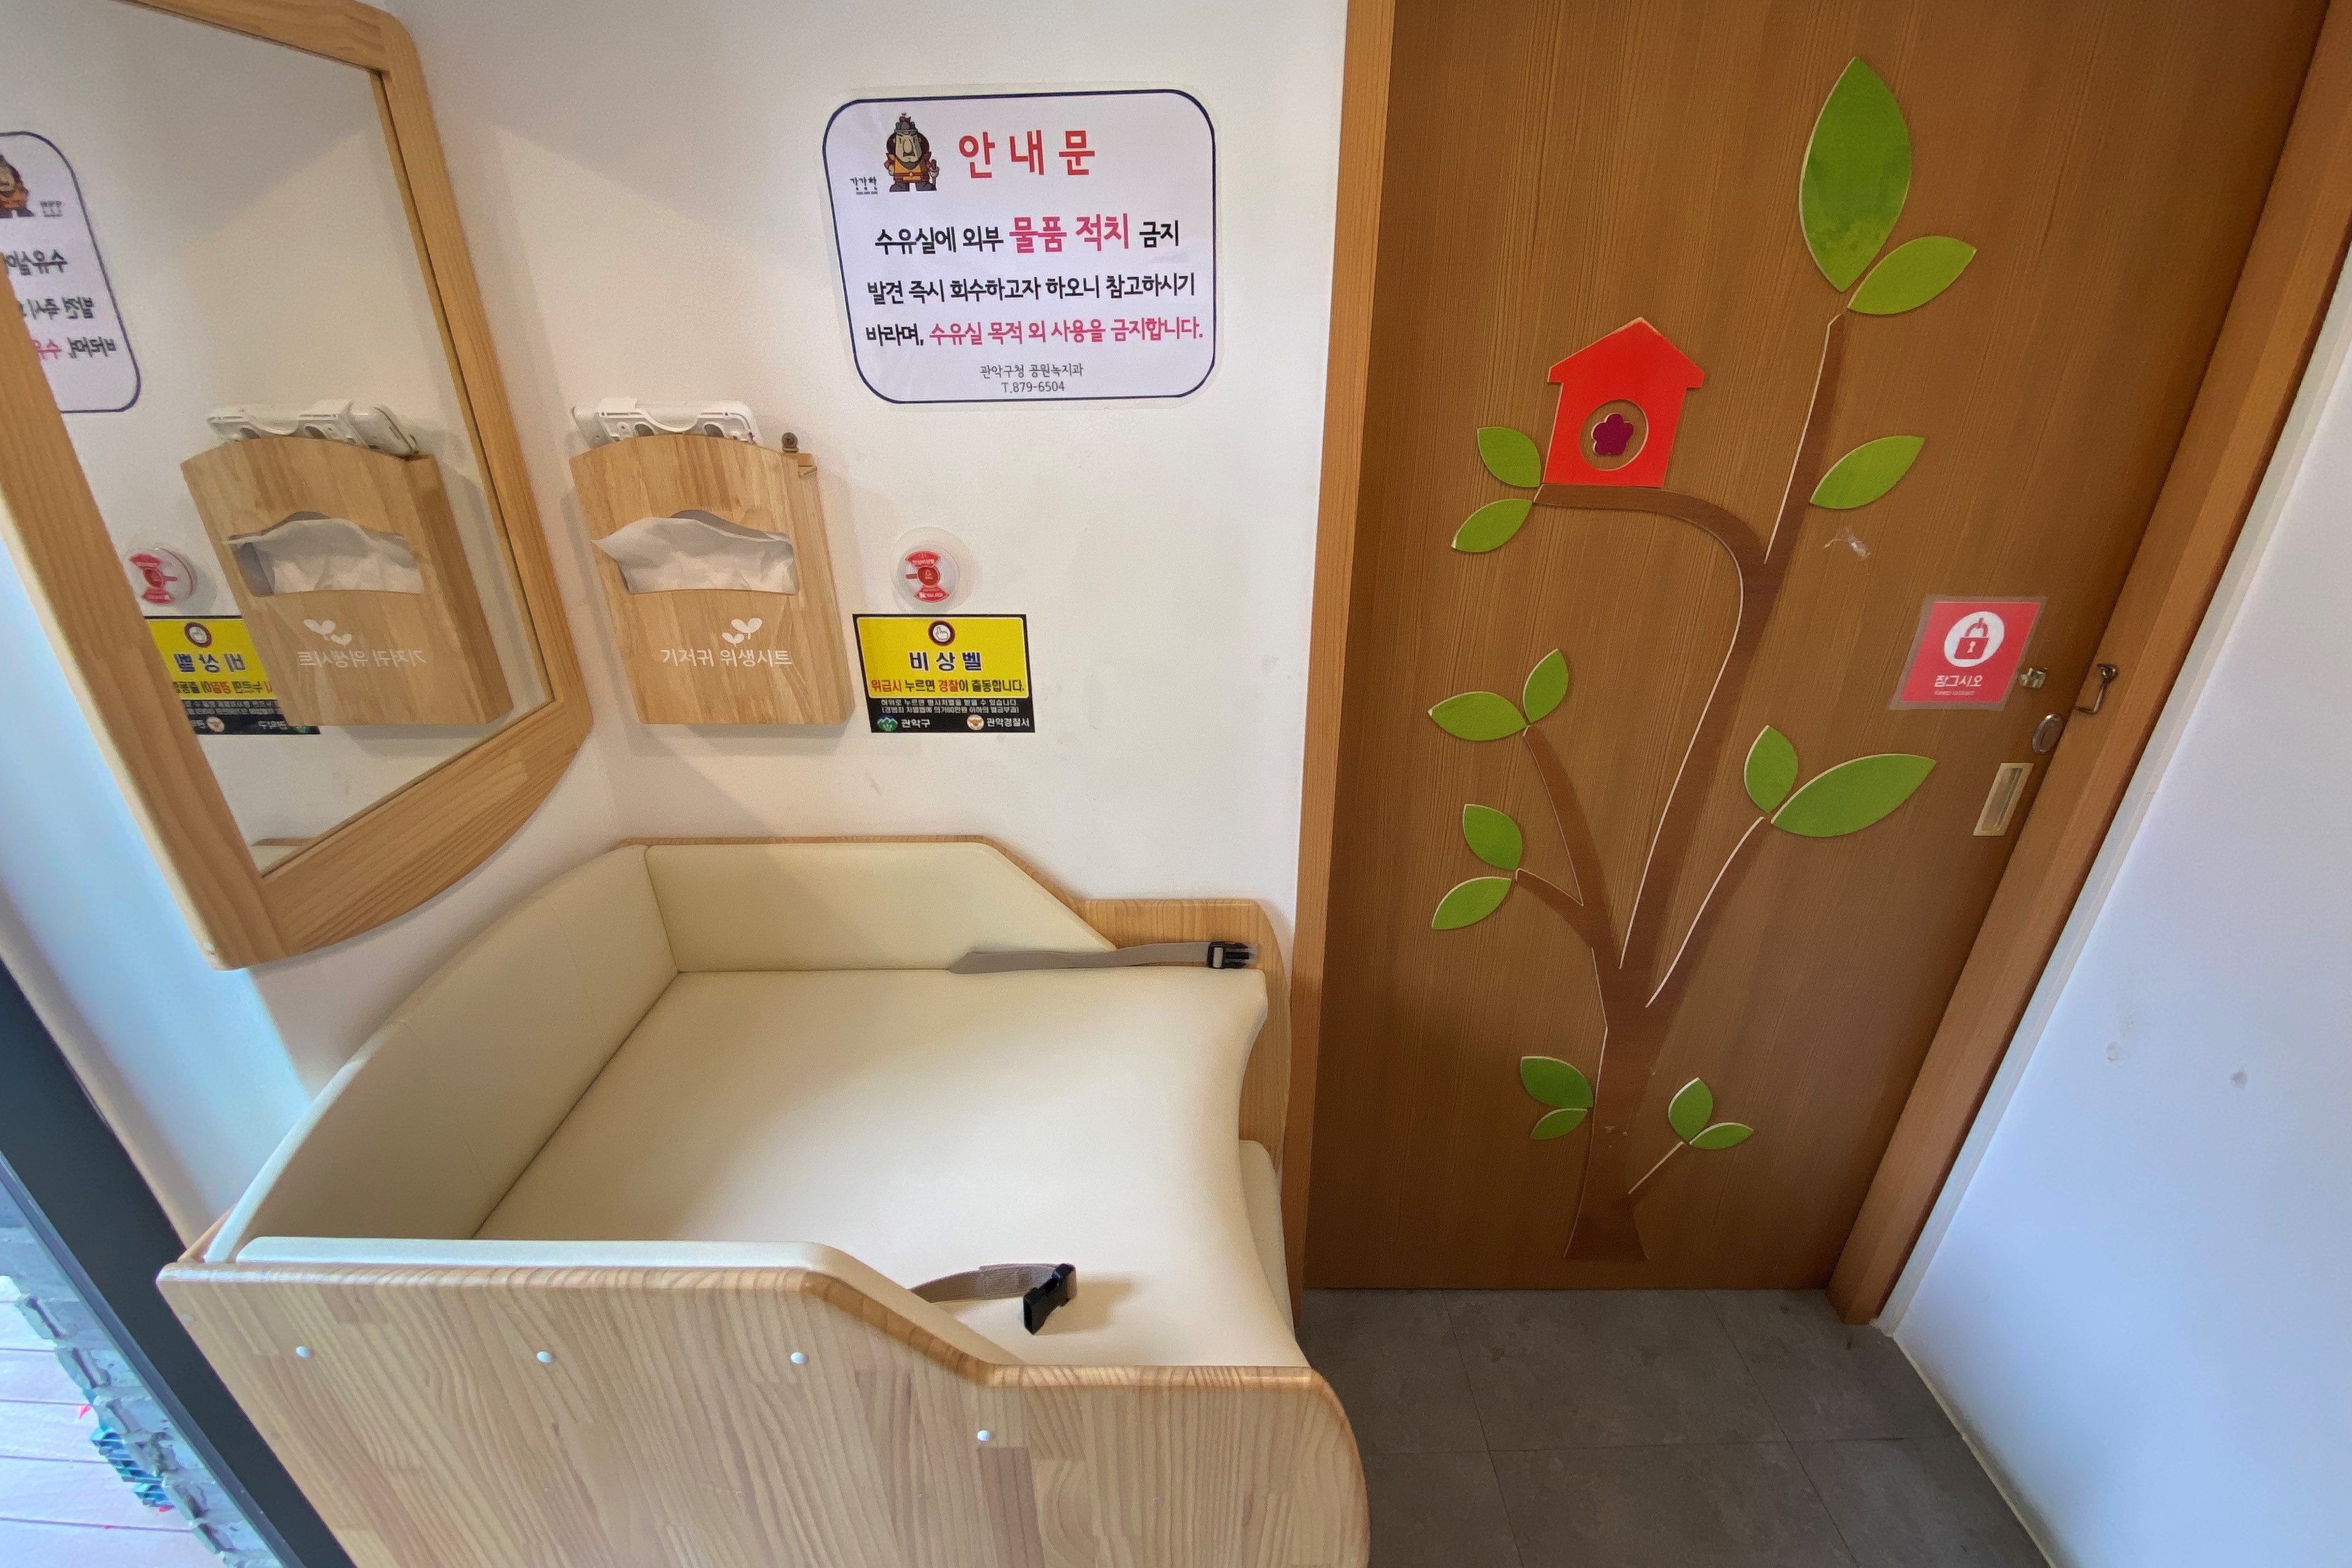 Facilities for pregnant women or families with children0 : Interior view of the nursing room in Nakseoungdae Park that gives cozy and warm sense of feeling